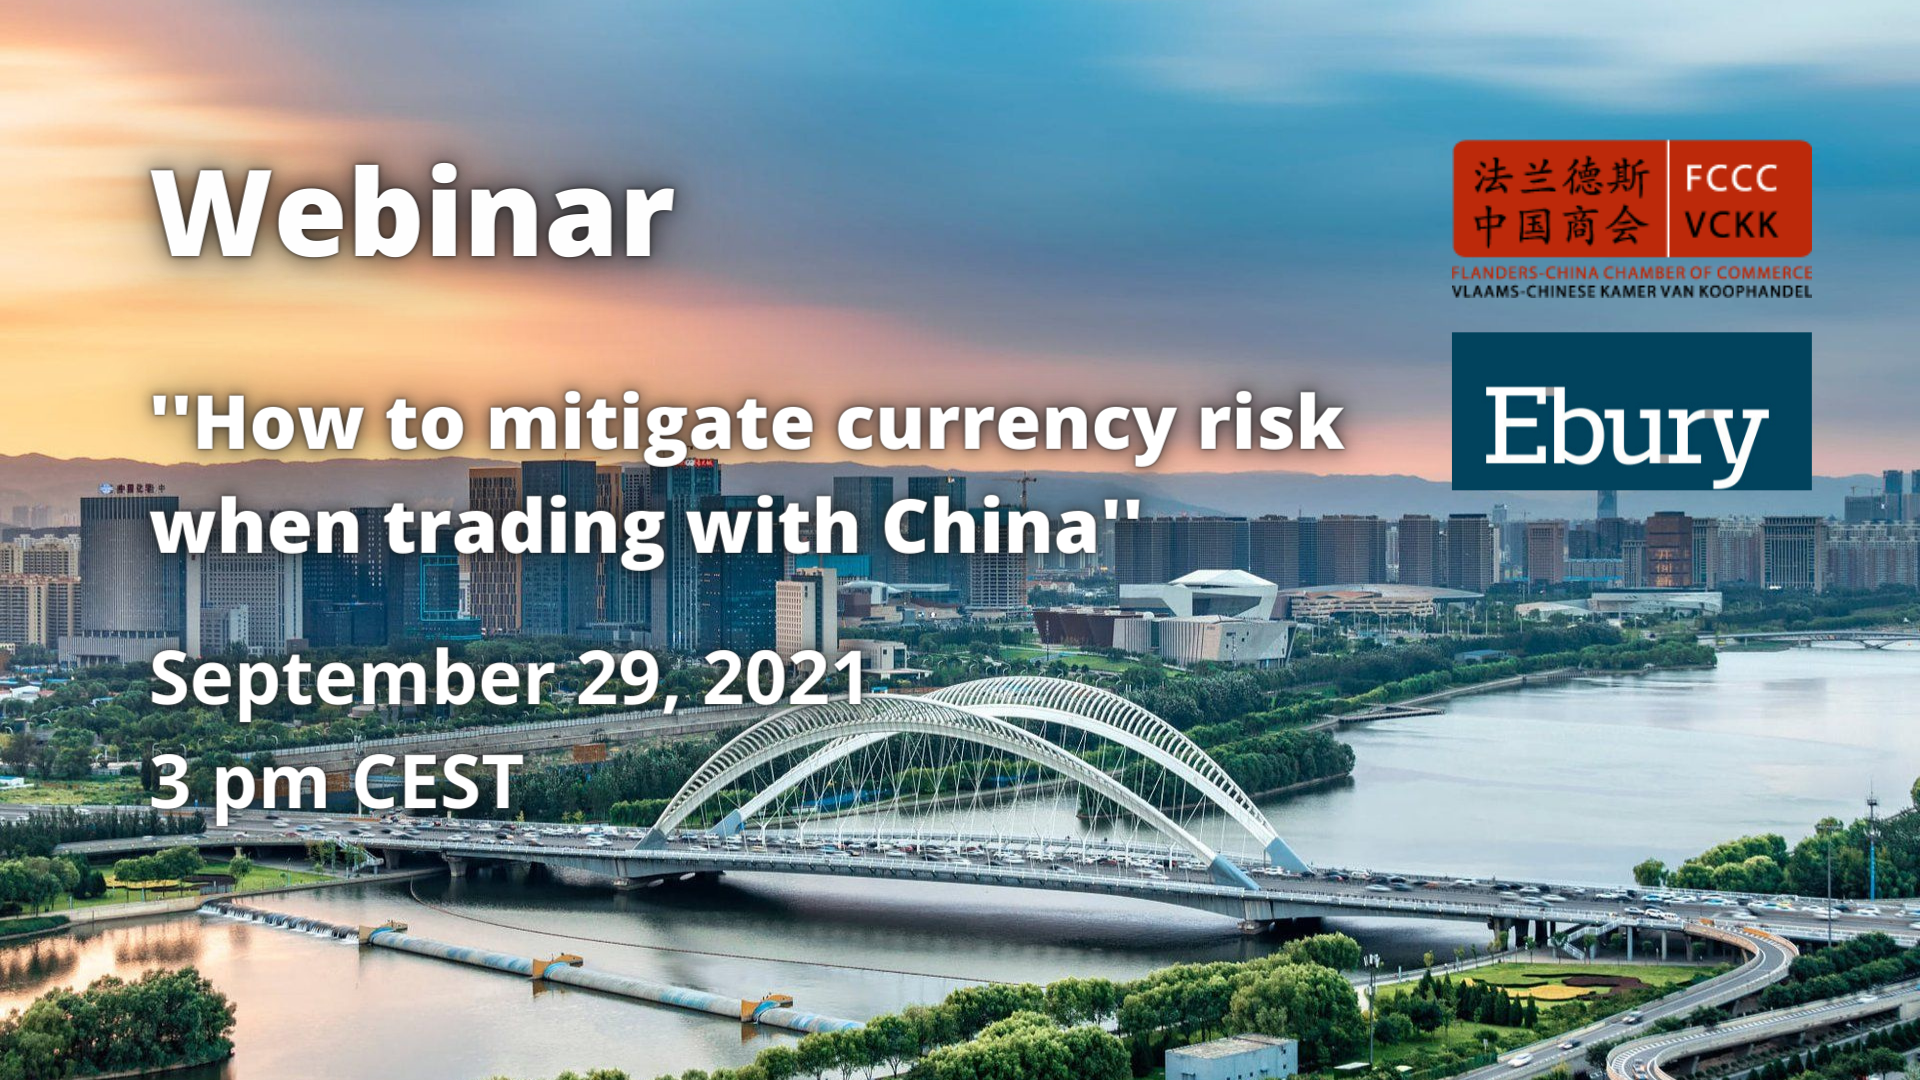 Webinar: How to mitigate currency risk when trading with China